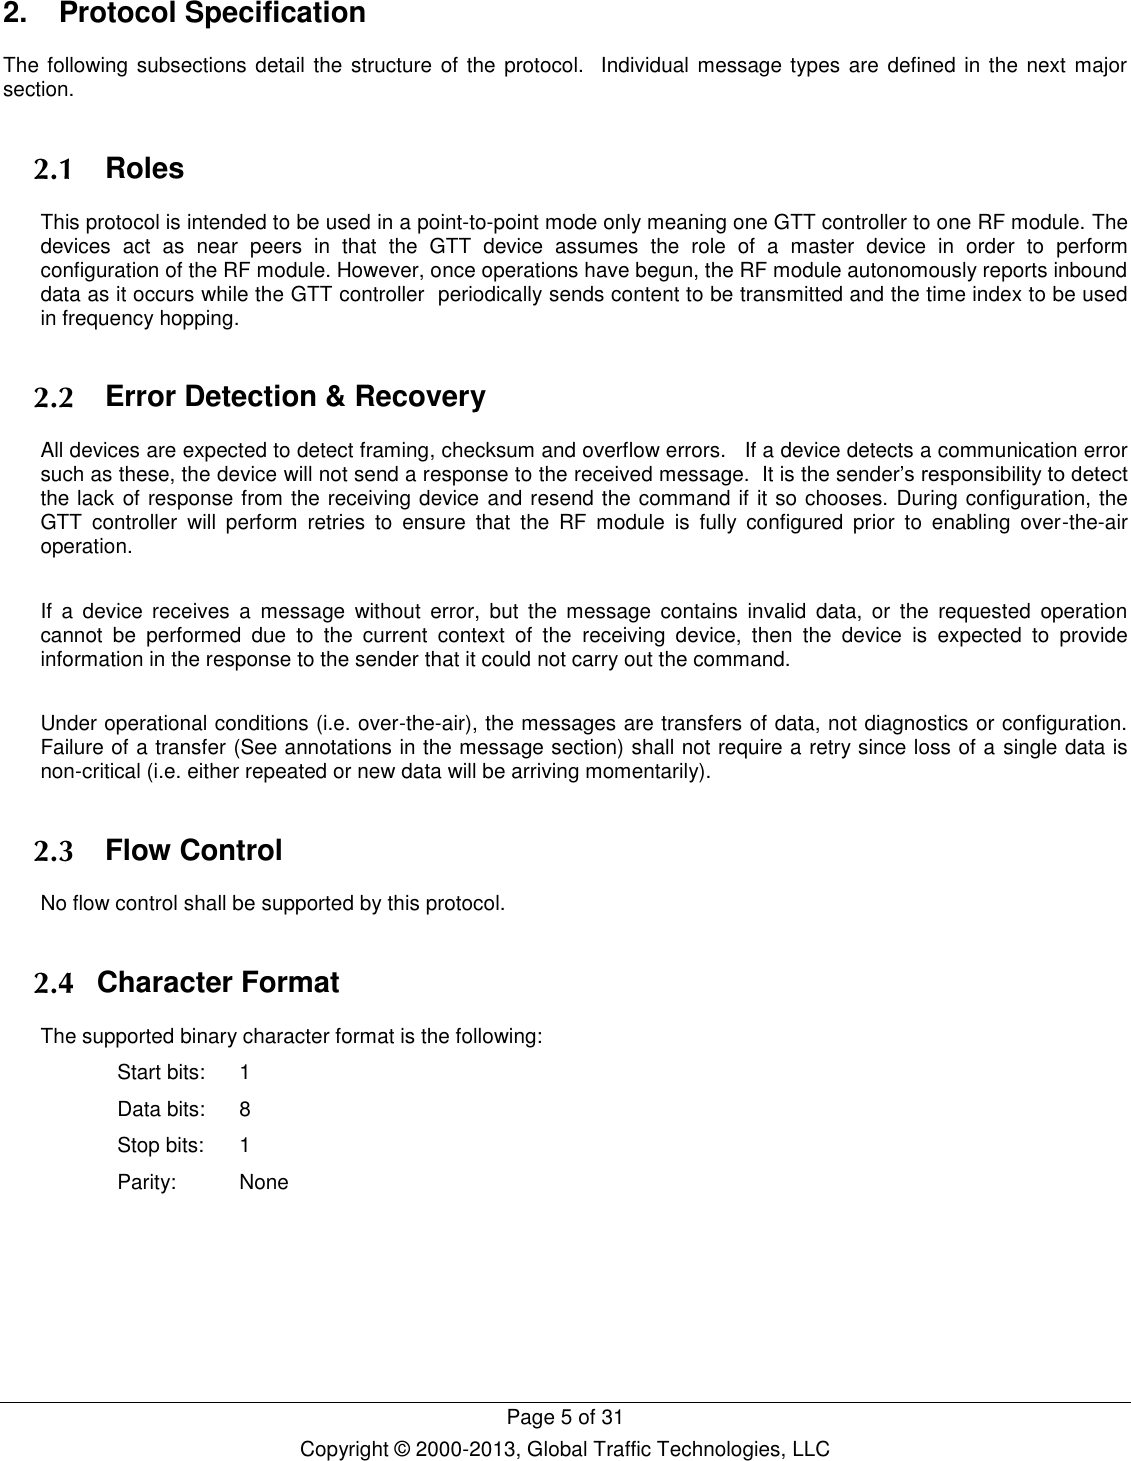   Page 5 of 31 Copyright © 2000-2013, Global Traffic Technologies, LLC 2.   Protocol Specification The following subsections detail the structure  of the protocol.  Individual message types are  defined in the next major section.    Roles This protocol is intended to be used in a point-to-point mode only meaning one GTT controller to one RF module. The devices  act  as  near  peers  in  that  the  GTT  device  assumes  the  role  of  a  master  device  in  order  to  perform configuration of the RF module. However, once operations have begun, the RF module autonomously reports inbound data as it occurs while the GTT controller  periodically sends content to be transmitted and the time index to be used in frequency hopping.      Error Detection &amp; Recovery All devices are expected to detect framing, checksum and overflow errors.   If a device detects a communication error such as these, the device will not send a response to the received message.  It is the sender’s responsibility to detect the lack of response from the receiving device and resend the command if it so chooses. During configuration, the GTT  controller  will  perform  retries  to  ensure  that  the  RF  module  is  fully  configured  prior  to  enabling  over-the-air operation.  If  a  device  receives  a  message  without  error,  but  the  message  contains  invalid  data,  or  the  requested  operation cannot  be  performed  due  to  the  current  context  of  the  receiving  device,  then  the  device  is  expected  to  provide information in the response to the sender that it could not carry out the command.    Under operational conditions (i.e. over-the-air), the messages are transfers of data, not diagnostics or configuration. Failure of a transfer (See annotations in the message section) shall not require a retry since loss of a single data is non-critical (i.e. either repeated or new data will be arriving momentarily).    Flow Control No flow control shall be supported by this protocol.      Character Format The supported binary character format is the following: Start bits: 1 Data bits: 8 Stop bits: 1 Parity: None    